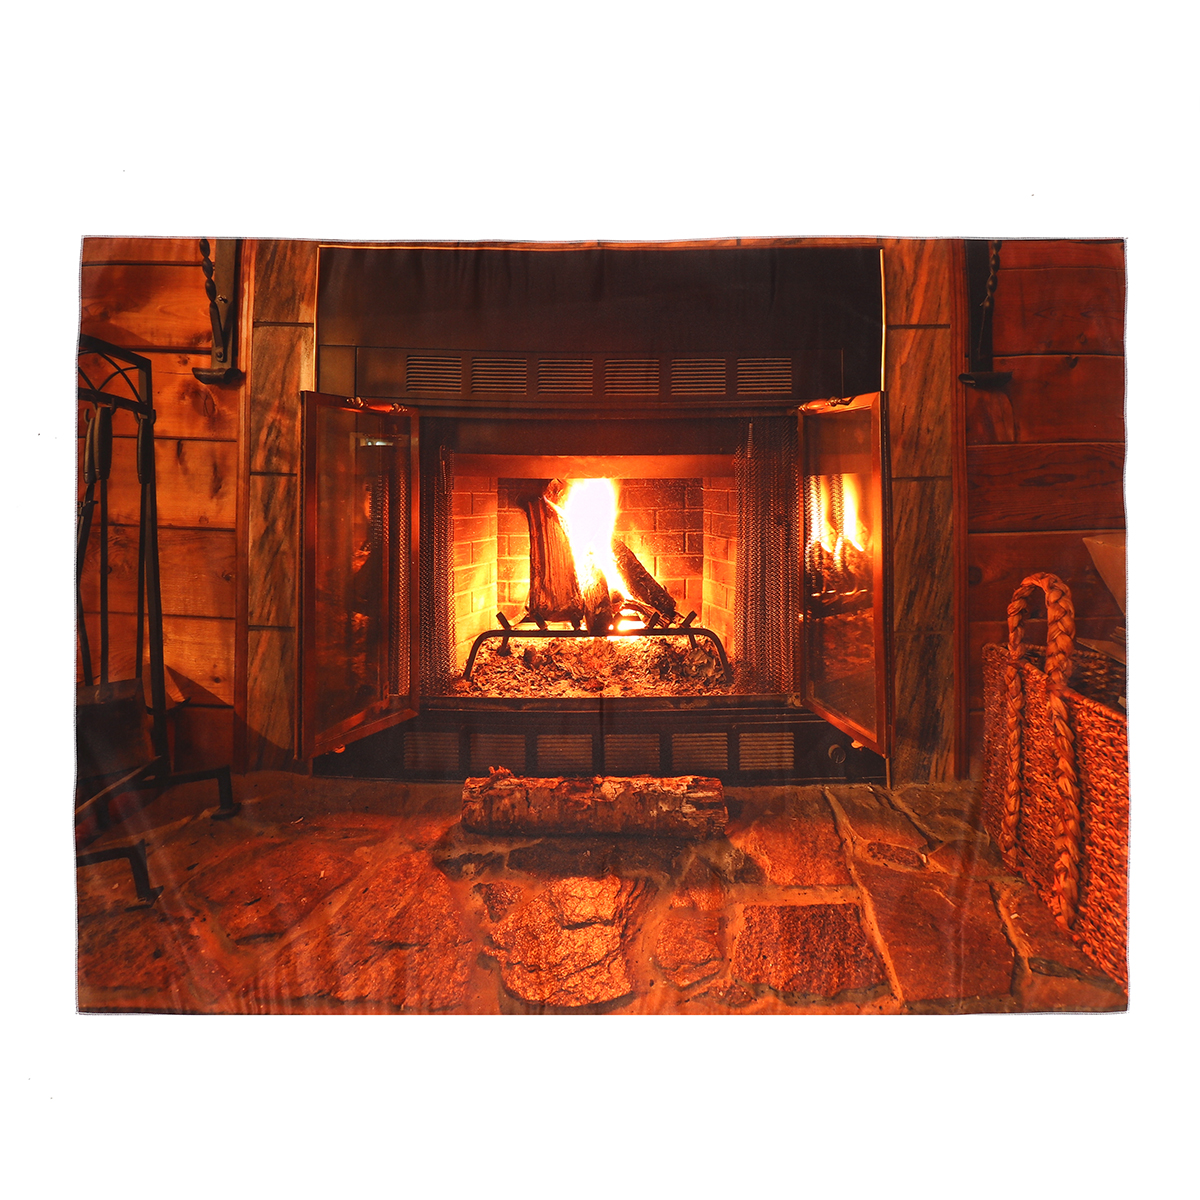 Polyester-Wall-Hanging-Tapestry-Art-Home-Decor-Fireplace-Pattern-Blankets-For-Home-Bedroom-Porch-Han-1636374-5